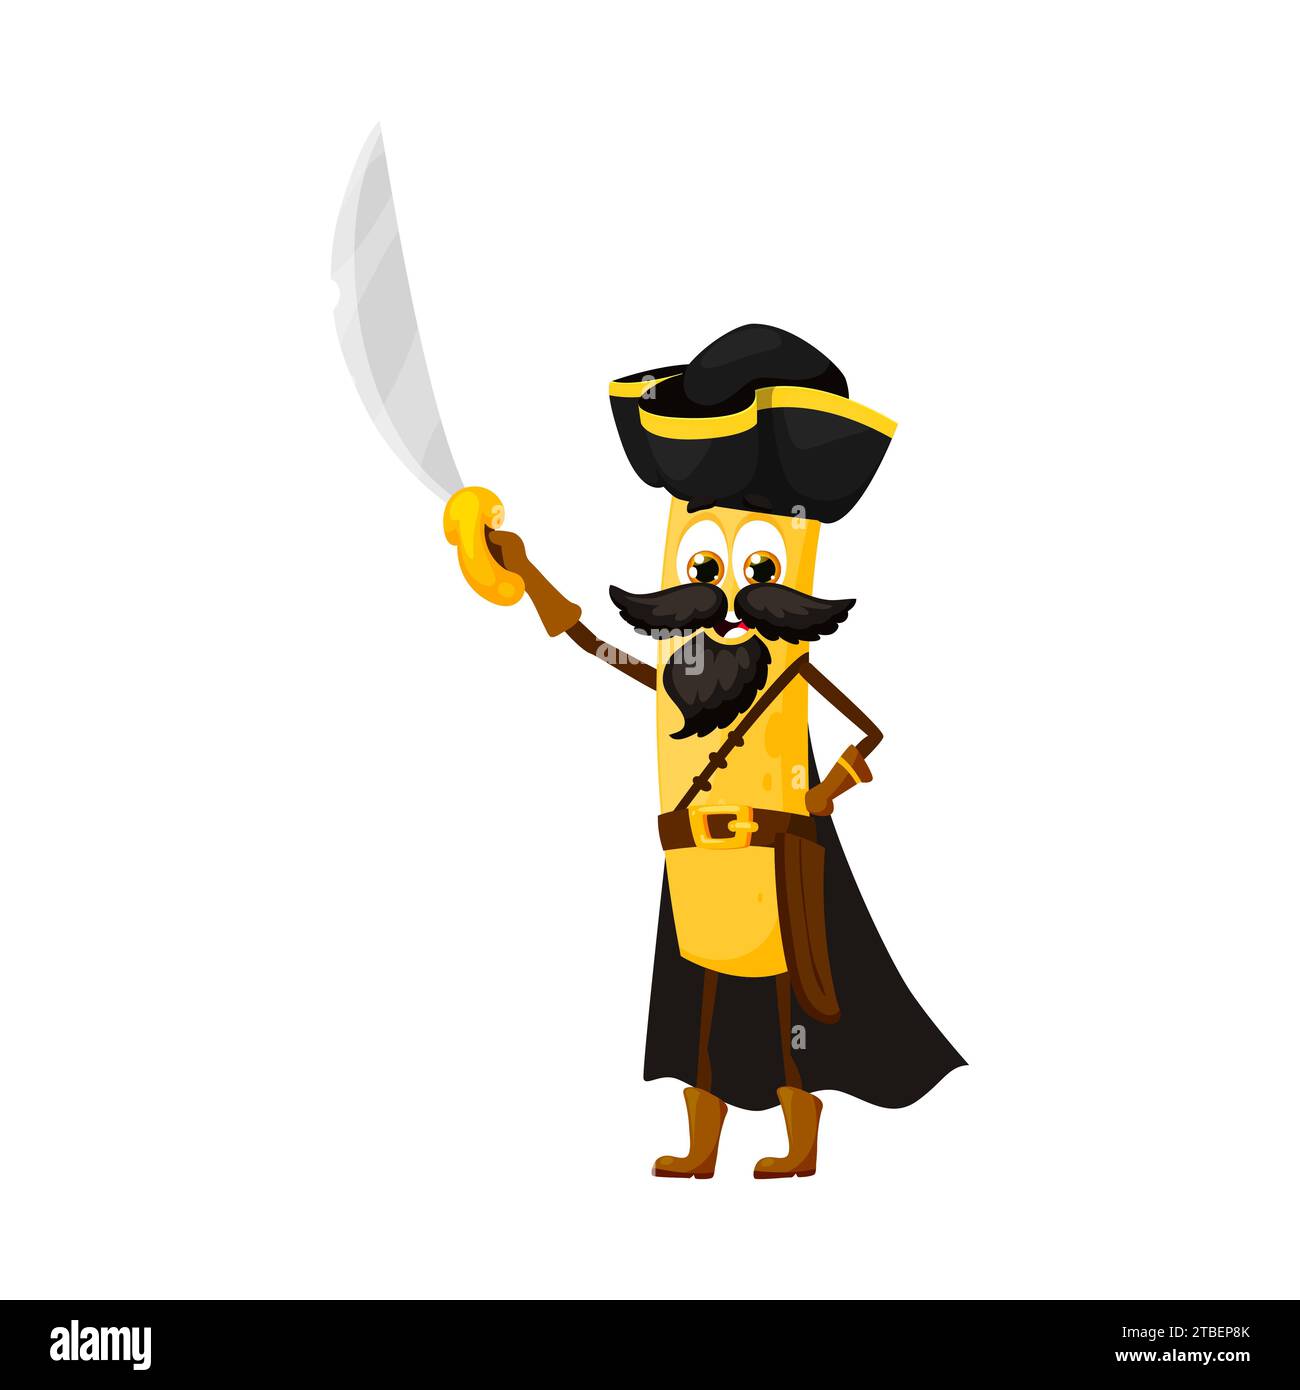 https://c8.alamy.com/comp/2TBEP8K/cartoon-funny-ziti-italian-pasta-pirate-and-corsair-character-armed-with-saber-isolated-vector-culinary-adventurer-sailing-the-high-seas-in-search-of-delicious-treasure-traditional-cuisine-of-italy-2TBEP8K.jpg